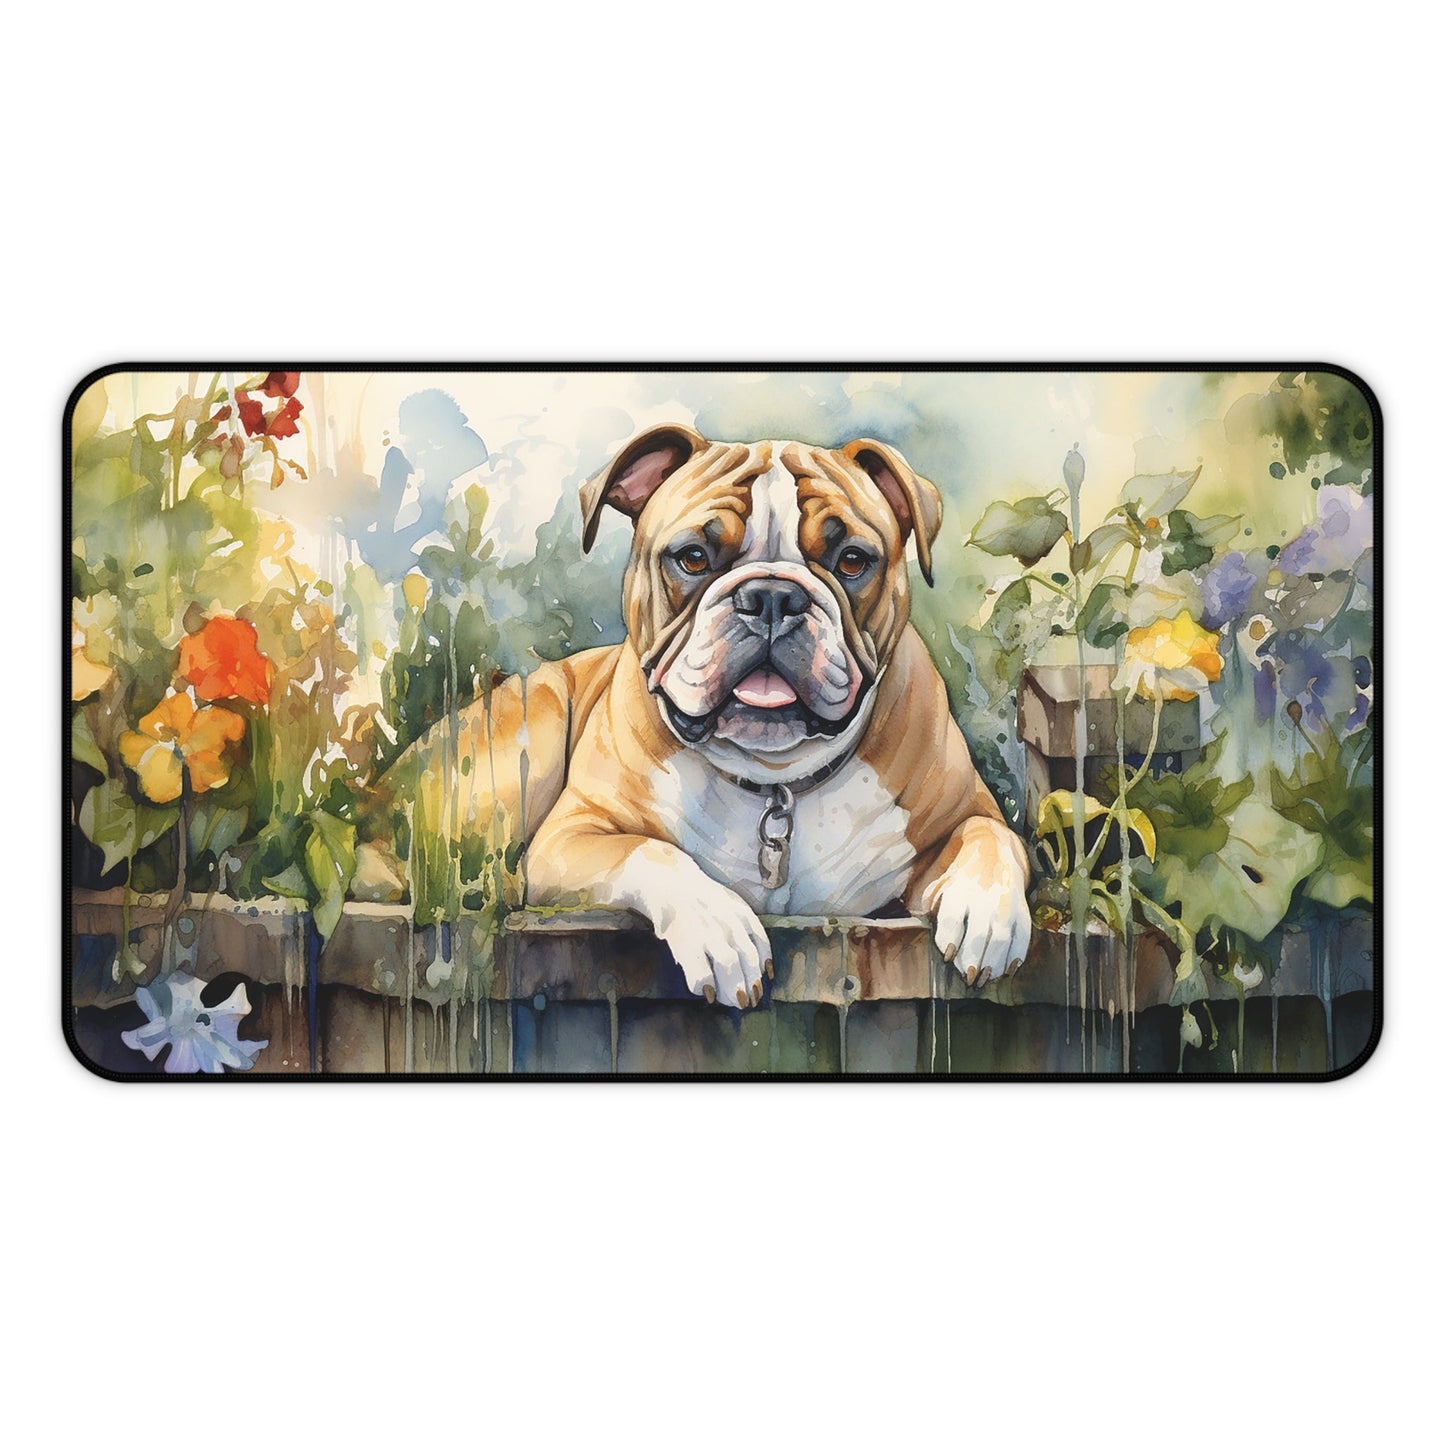 Cute Bulldog In the Garden Large Mouse Pad, Unique Computer Mouse Mats - FlooredByArt